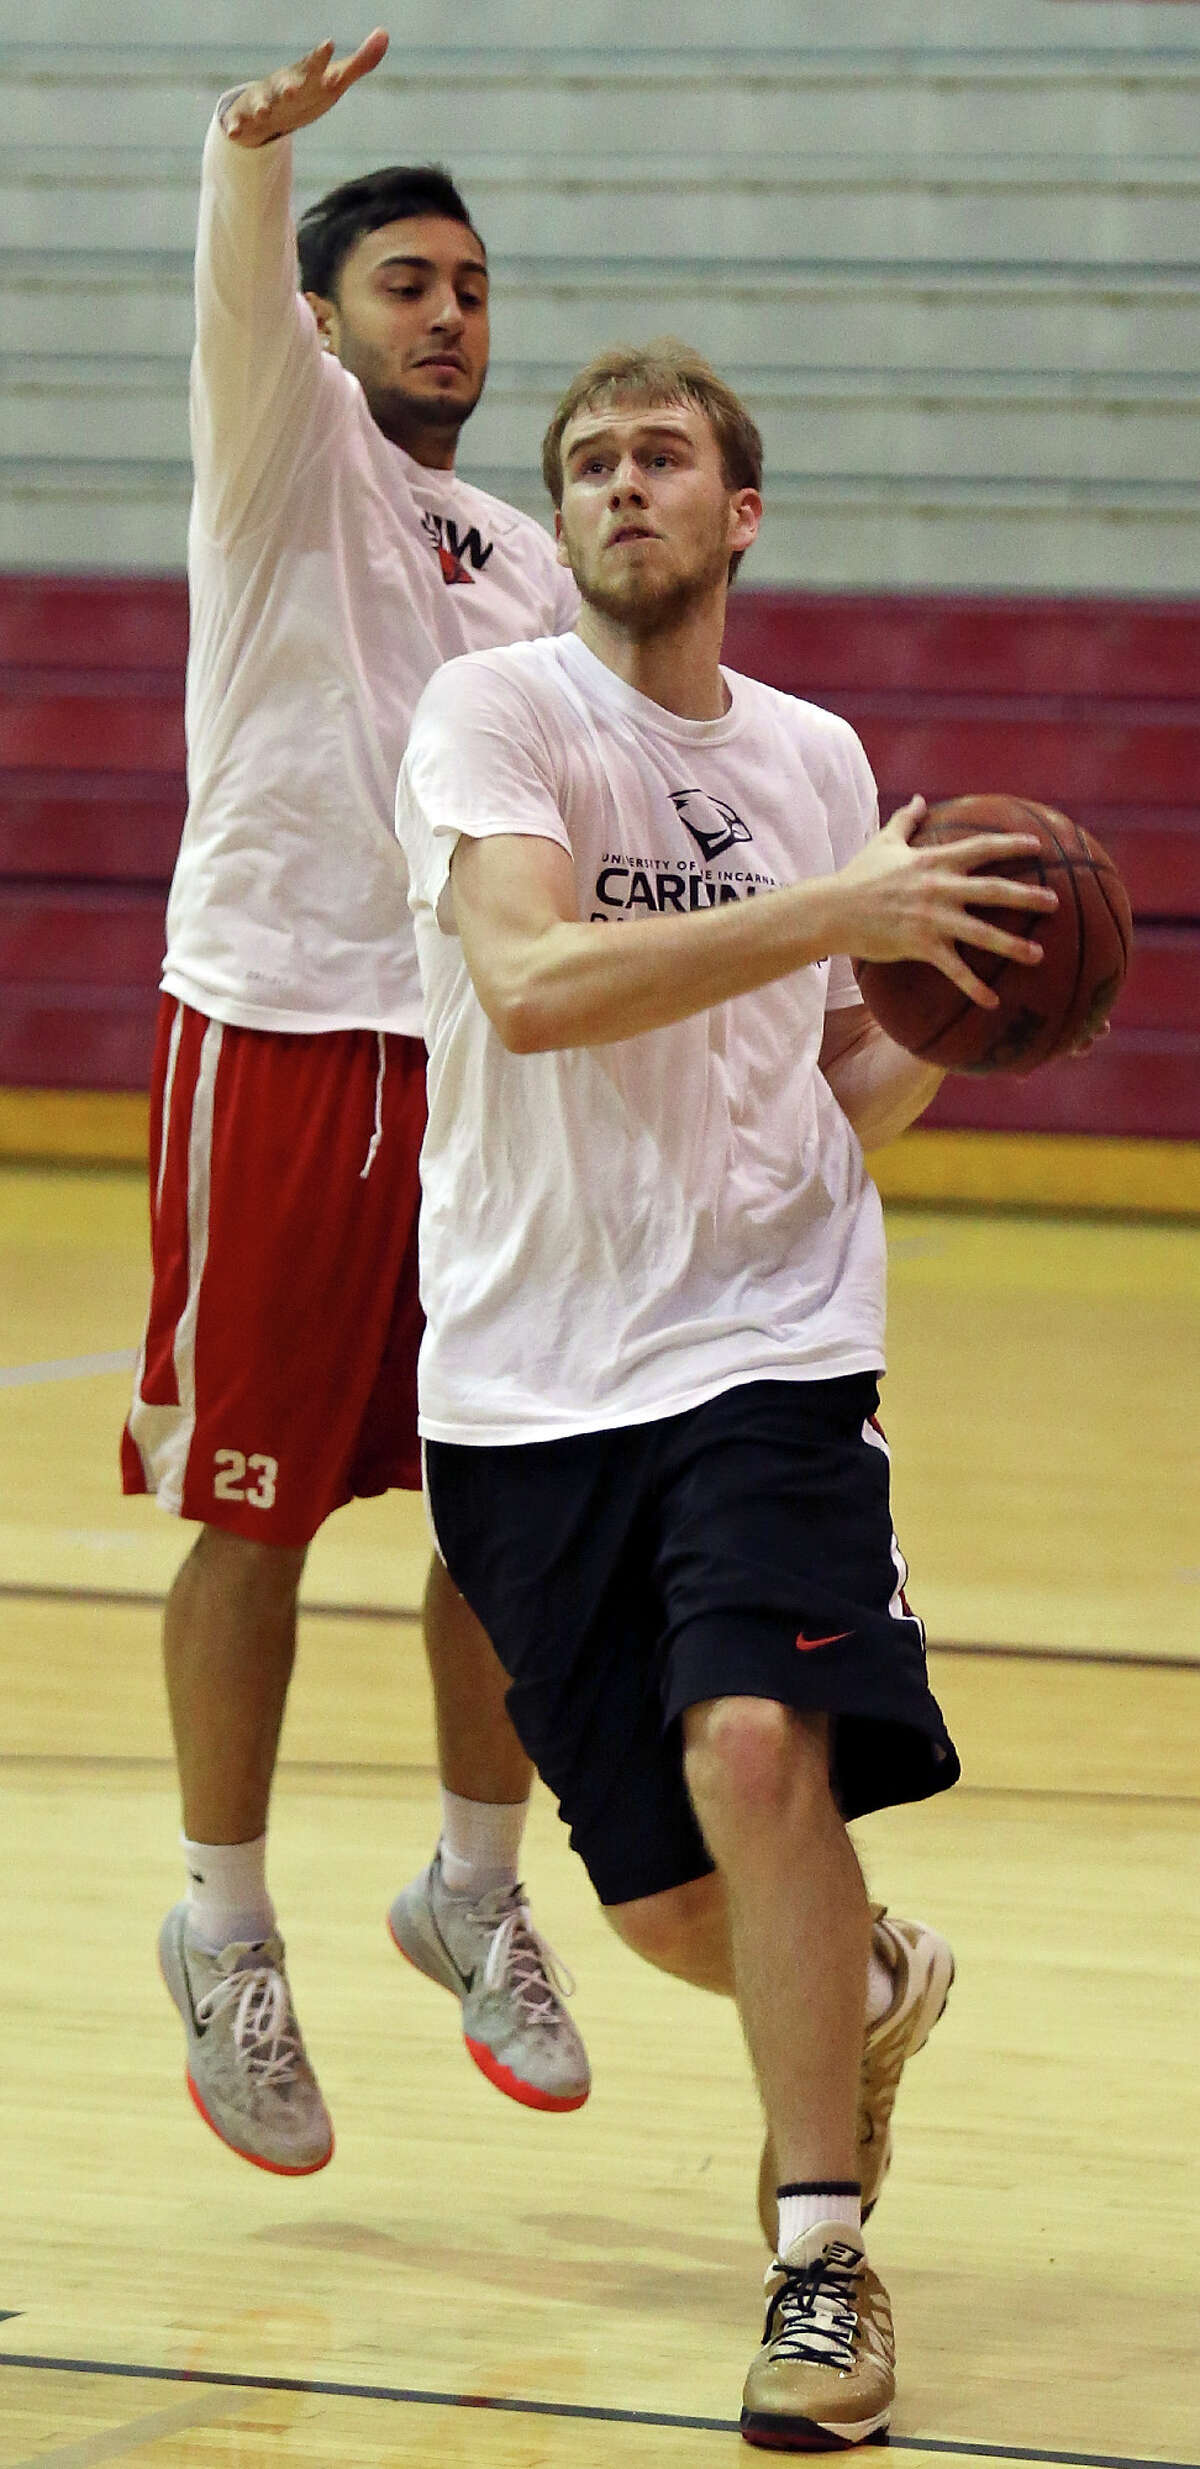 University of the Incarnate Word’s Jorden Kite (right) drives to the basket around University of the Incarnate Word’s Mitchell Badillo during a workout Monday June 29, 2015 at the McDermott Center.